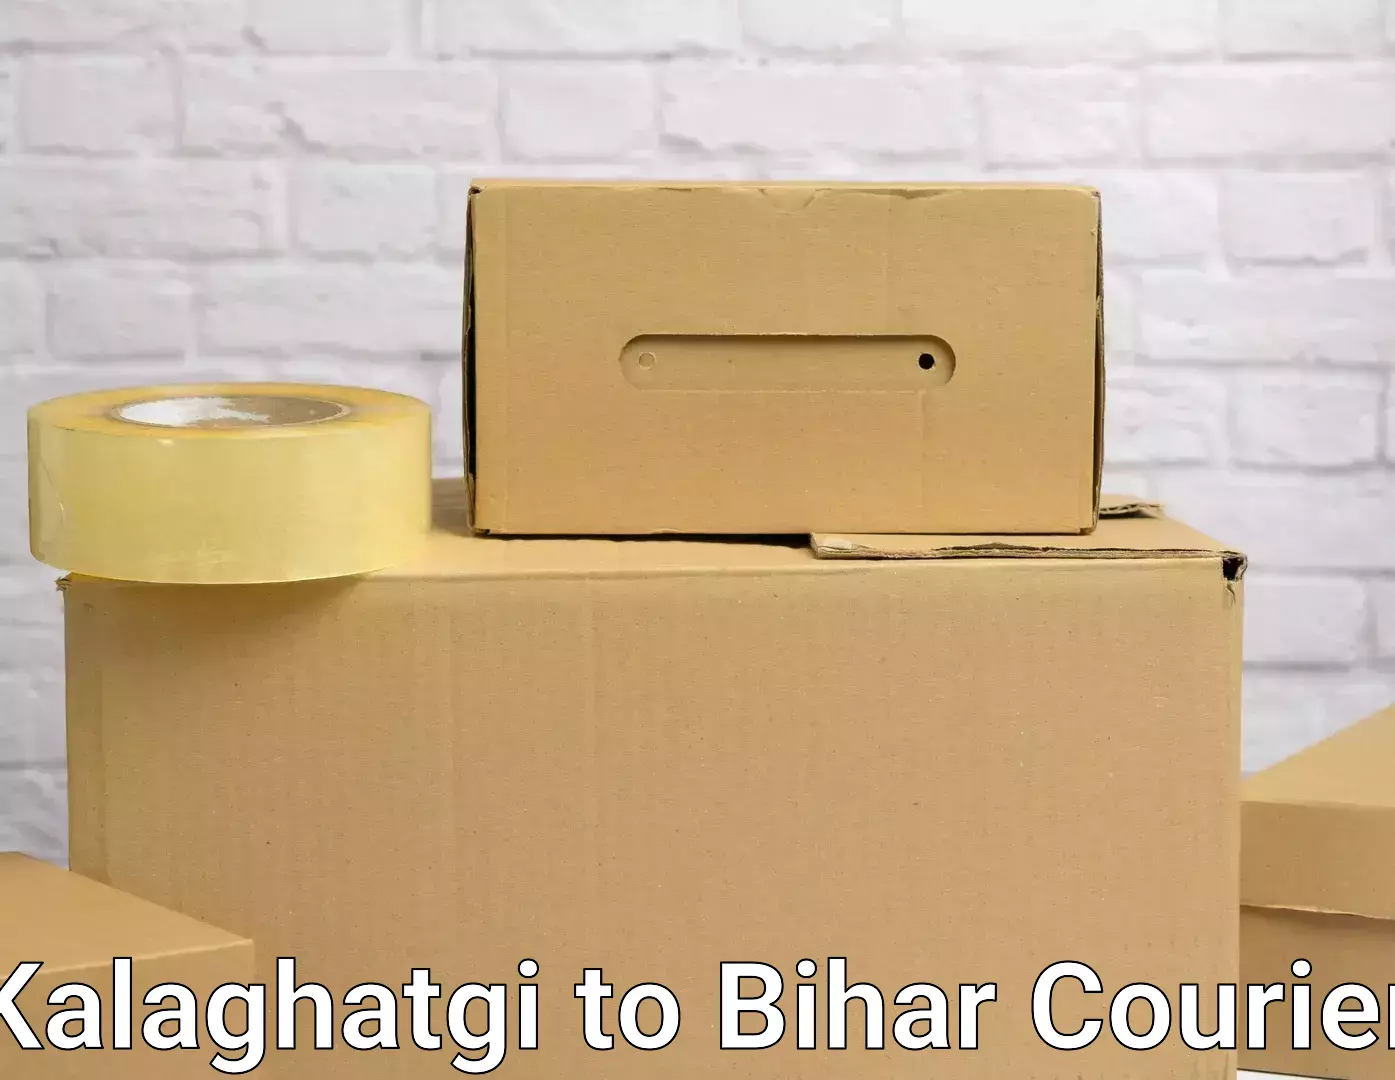 Professional movers and packers Kalaghatgi to Bihar